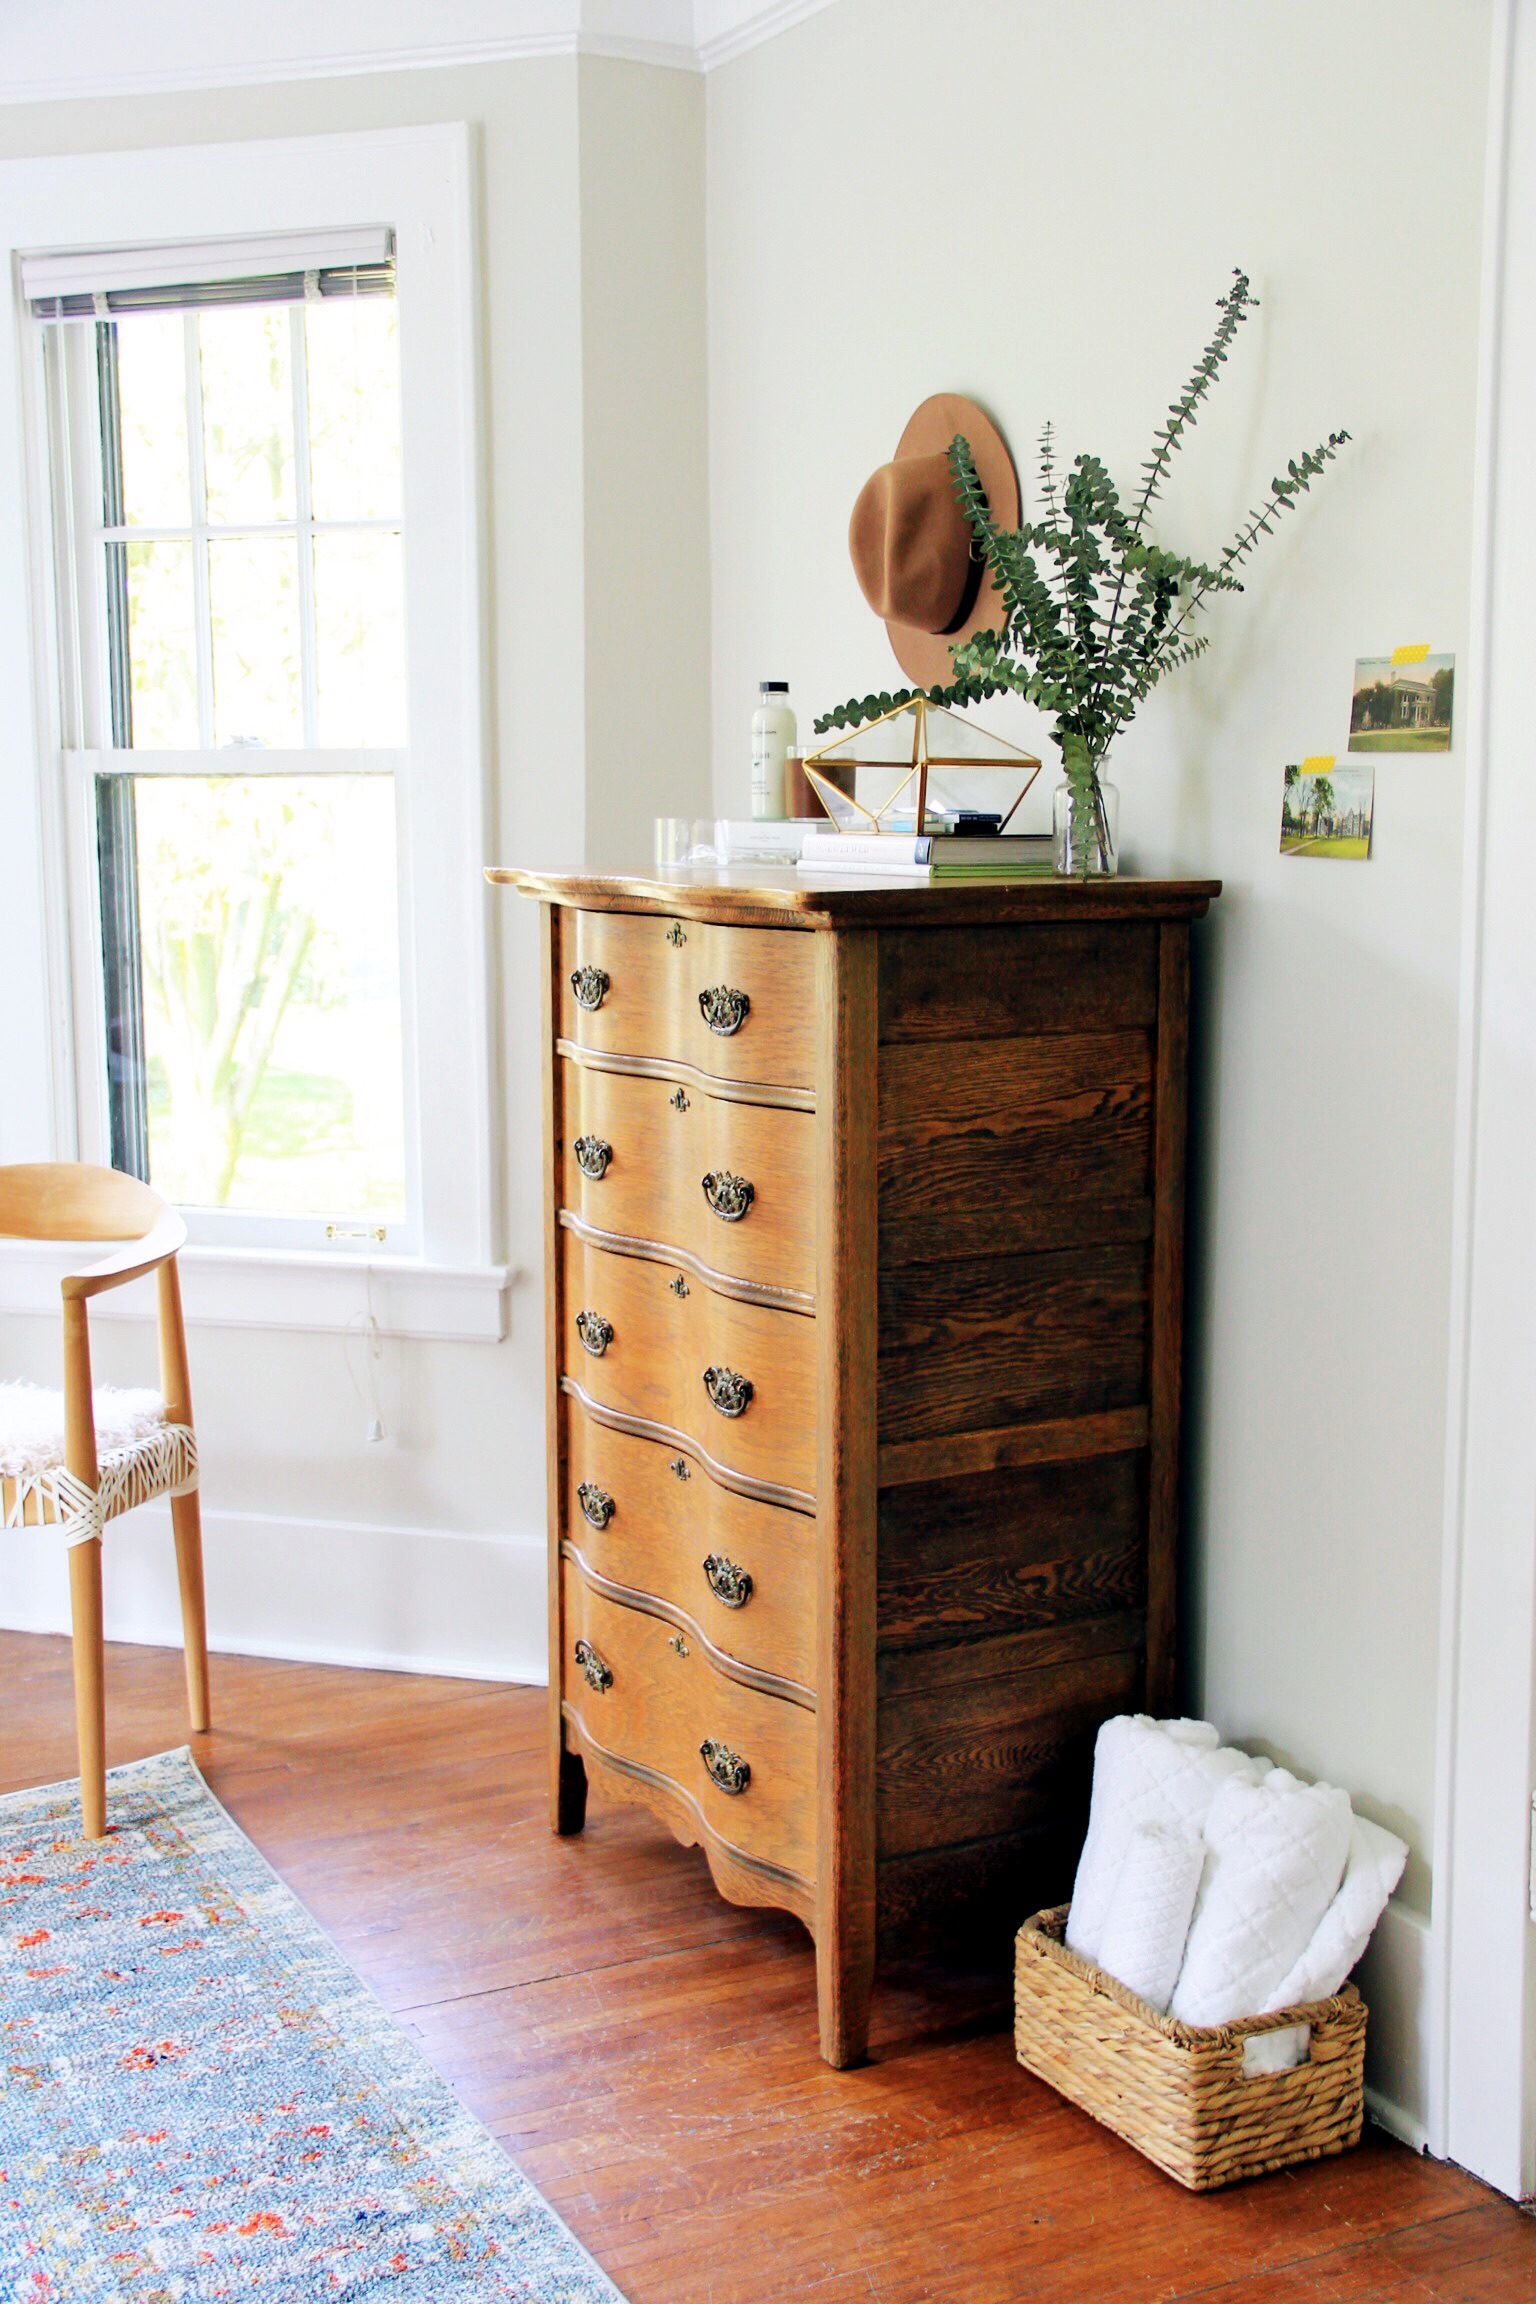 New house updates: a warm, Bohemian guest bedroom — The Pastiche